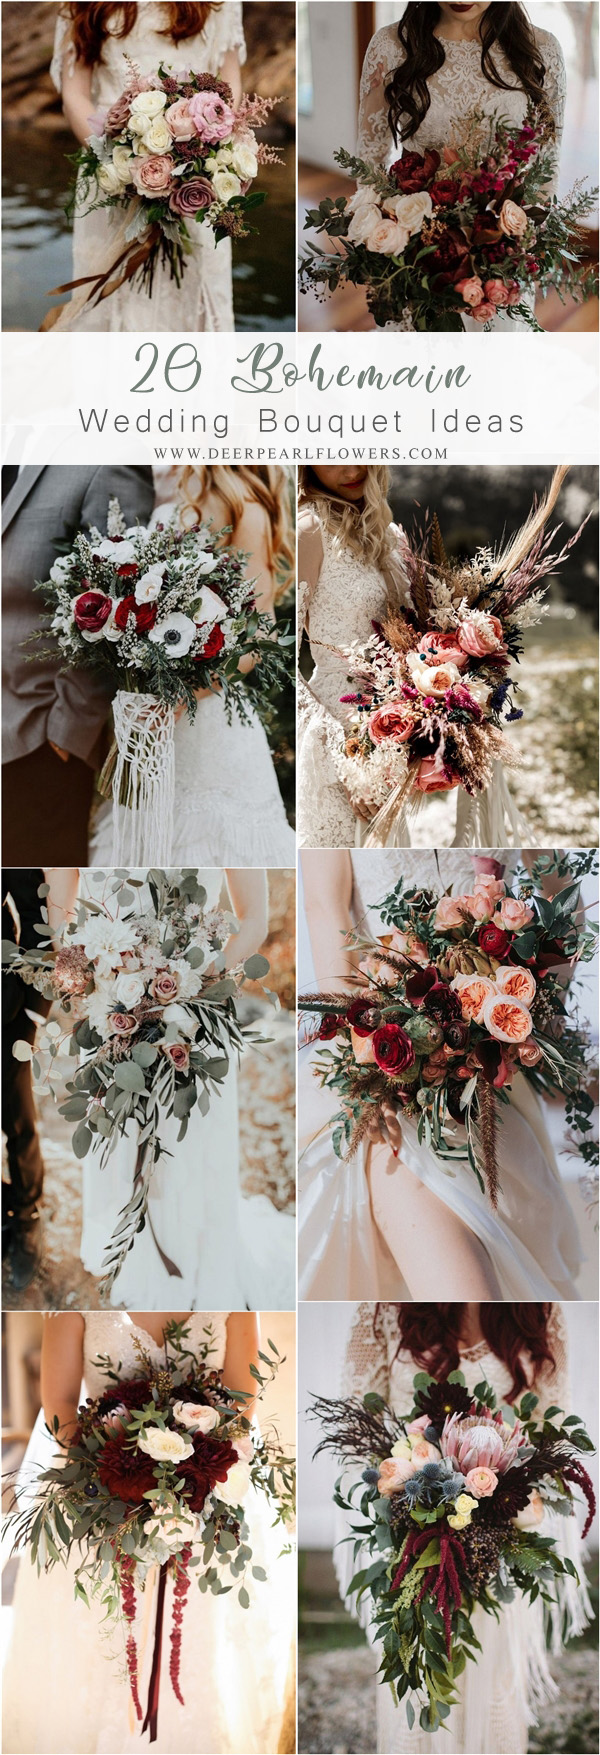 Bohemian wedding bouquet and flowers